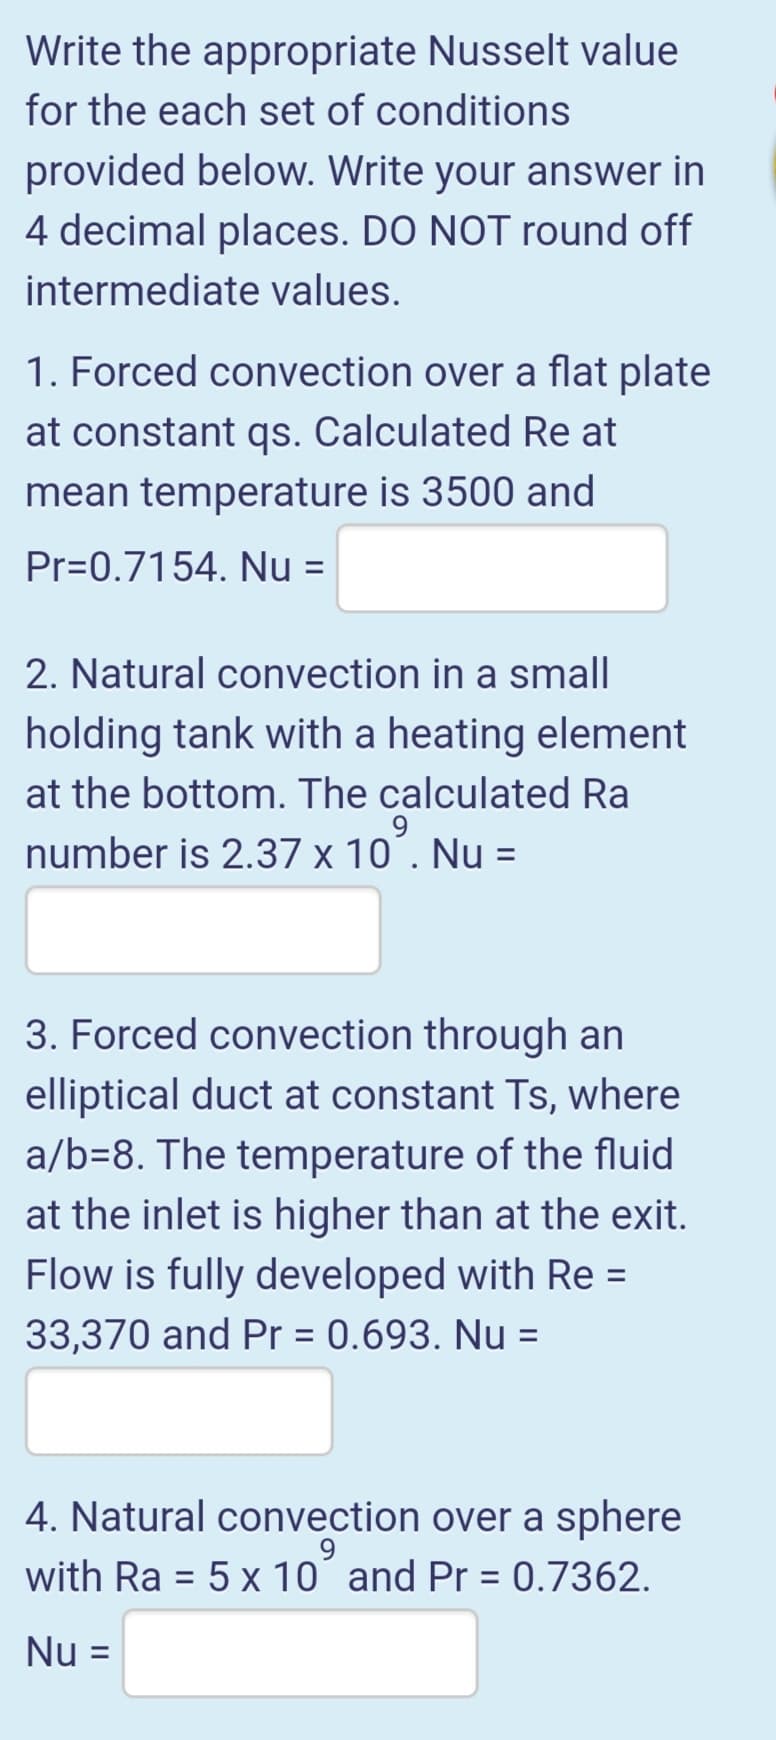 Write the appropriate Nusselt value
for the each set of conditions
provided below. Write your answer in
4 decimal places. DO NOT round off
intermediate values.
1. Forced convection over a flat plate
at constant qs. Calculated Re at
mean temperature is 3500 and
Pr=0.7154. Nu =
2. Natural convection in a small
holding tank with a heating element
at the bottom. The calculated Ra
number is 2.37 x 10´. Nu =
3. Forced convection through an
elliptical duct at constant Ts, where
a/b=8. The temperature of the fluid
at the inlet is higher than at the exit.
Flow is fully developed with Re =
33,370 and Pr = 0.693. Nu =
4. Natural convection over a sphere
with Ra = 5 x 10´ and Pr = 0.7362.
%3D
%3D
Nu =
